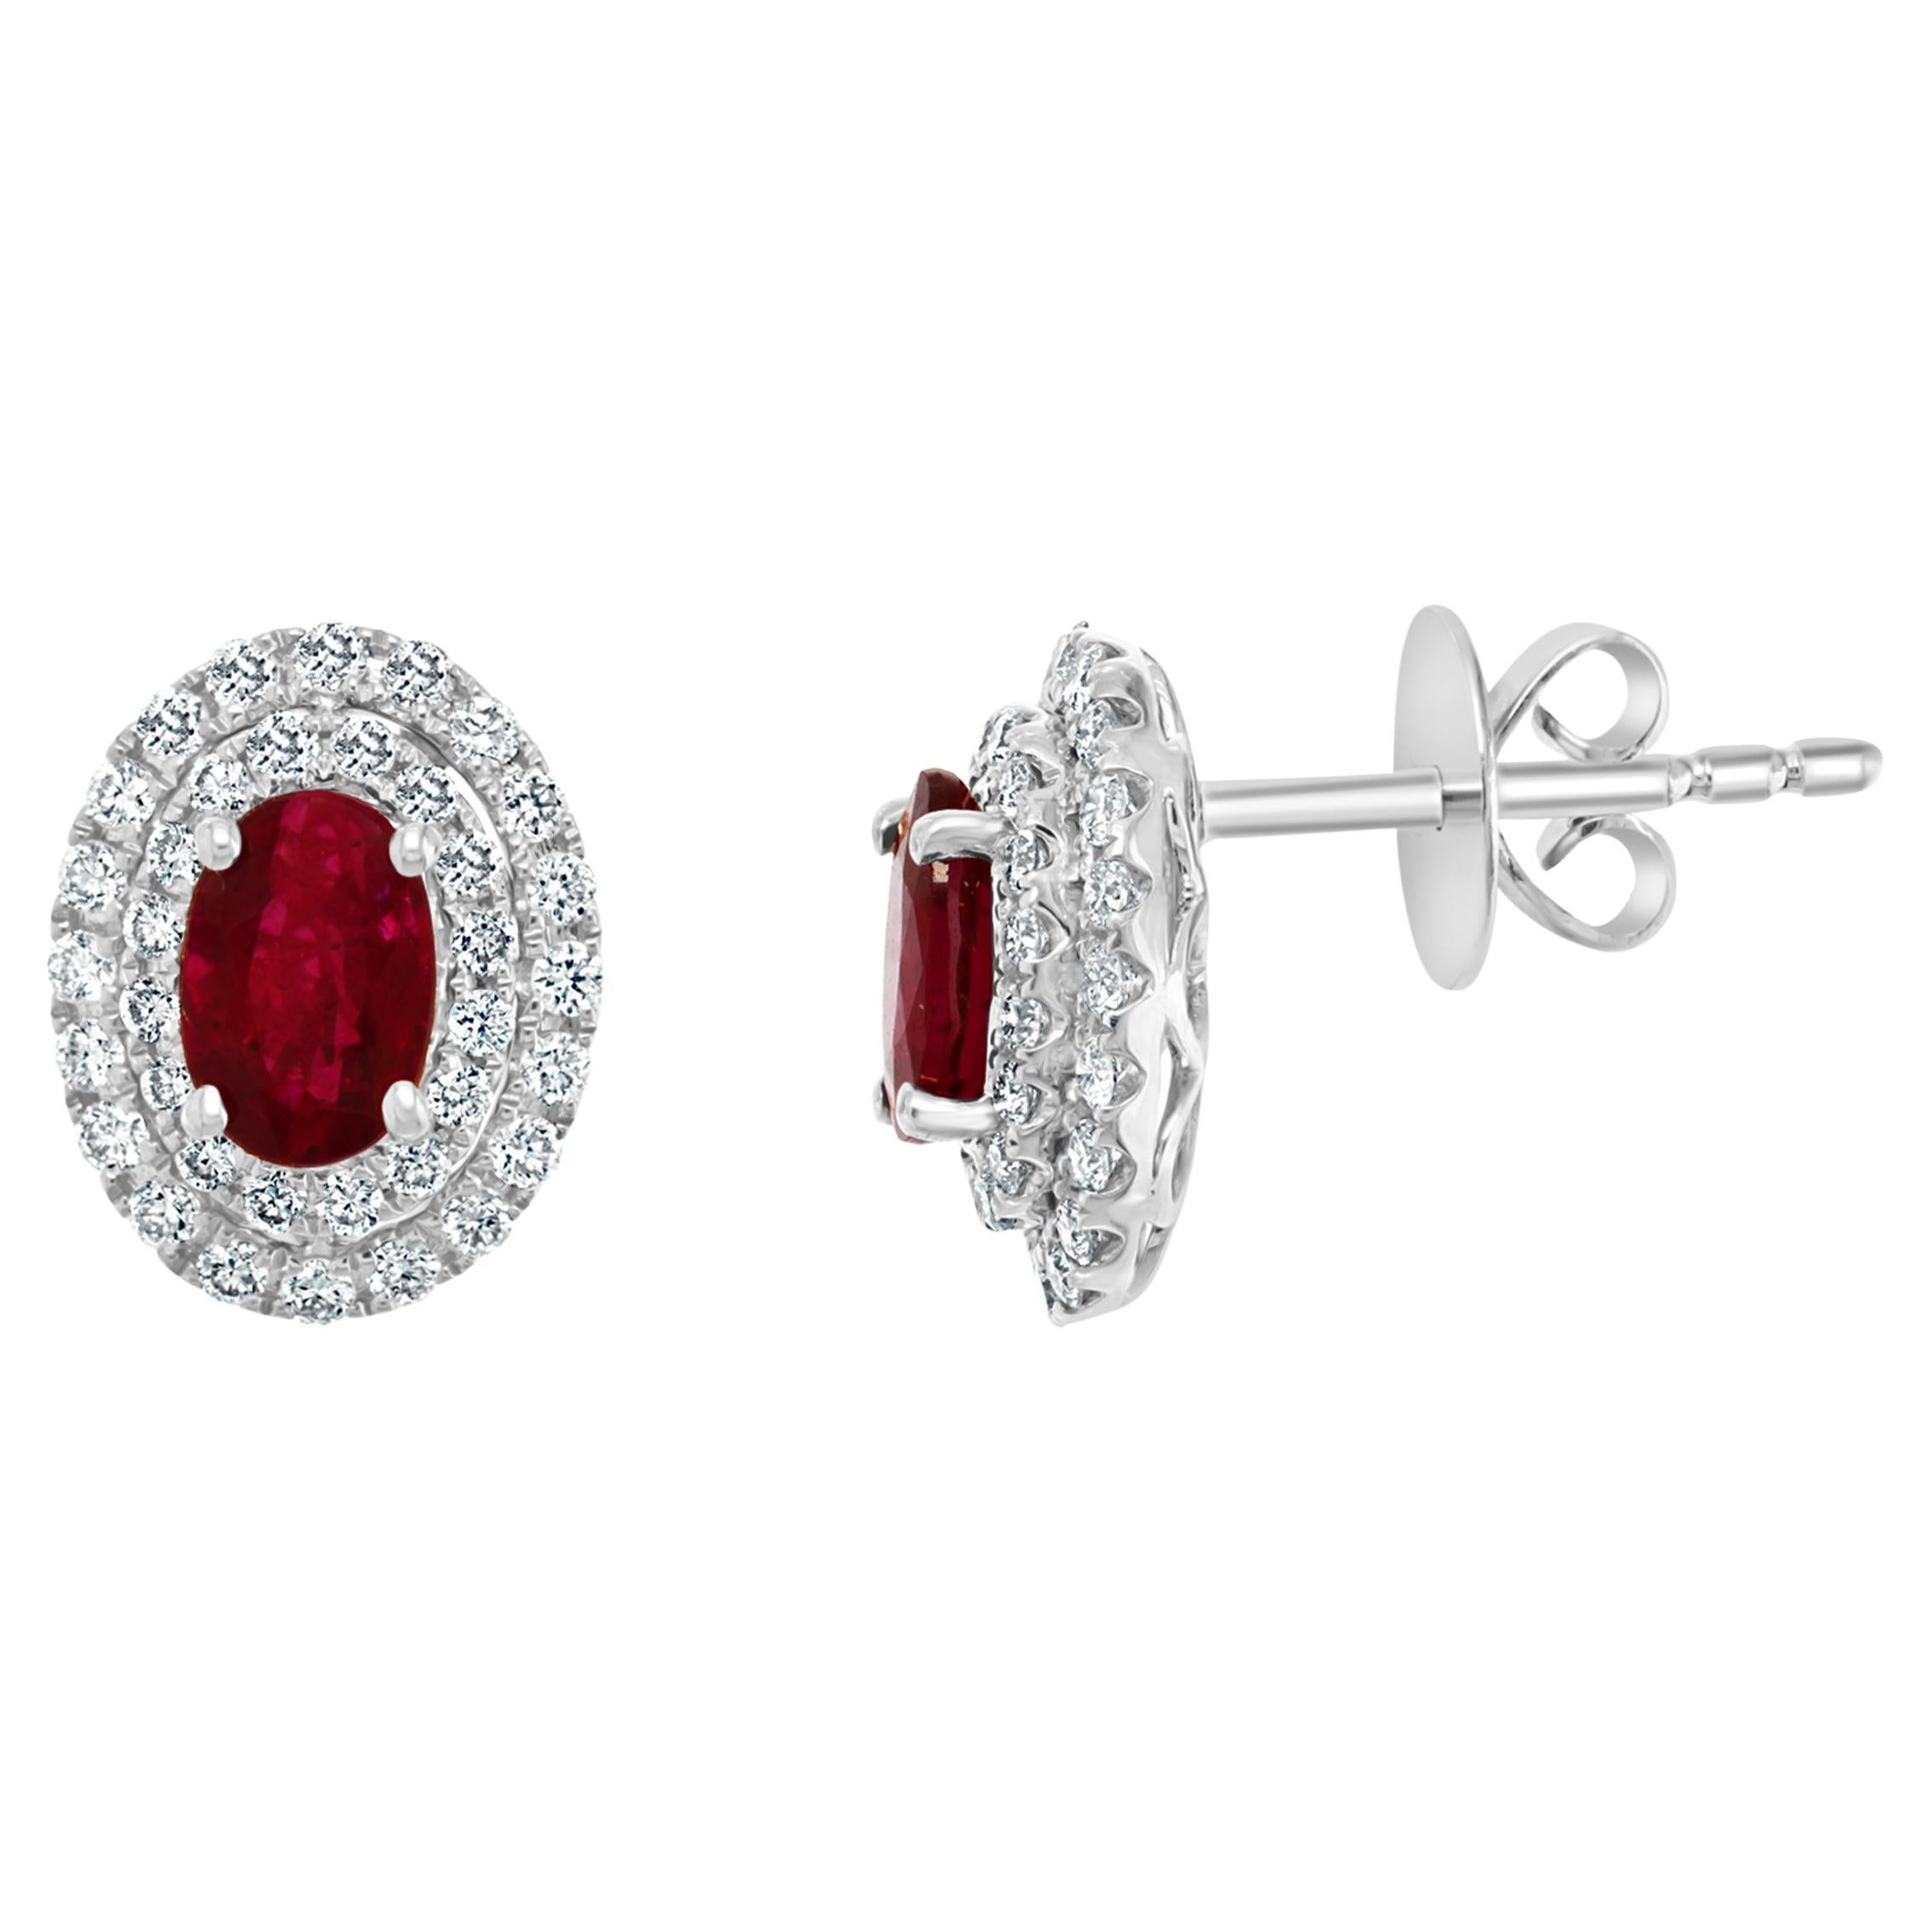 1.45 Carat Oval Cut Ruby and Diamond Stud Earrings in 18K White Gold at ...